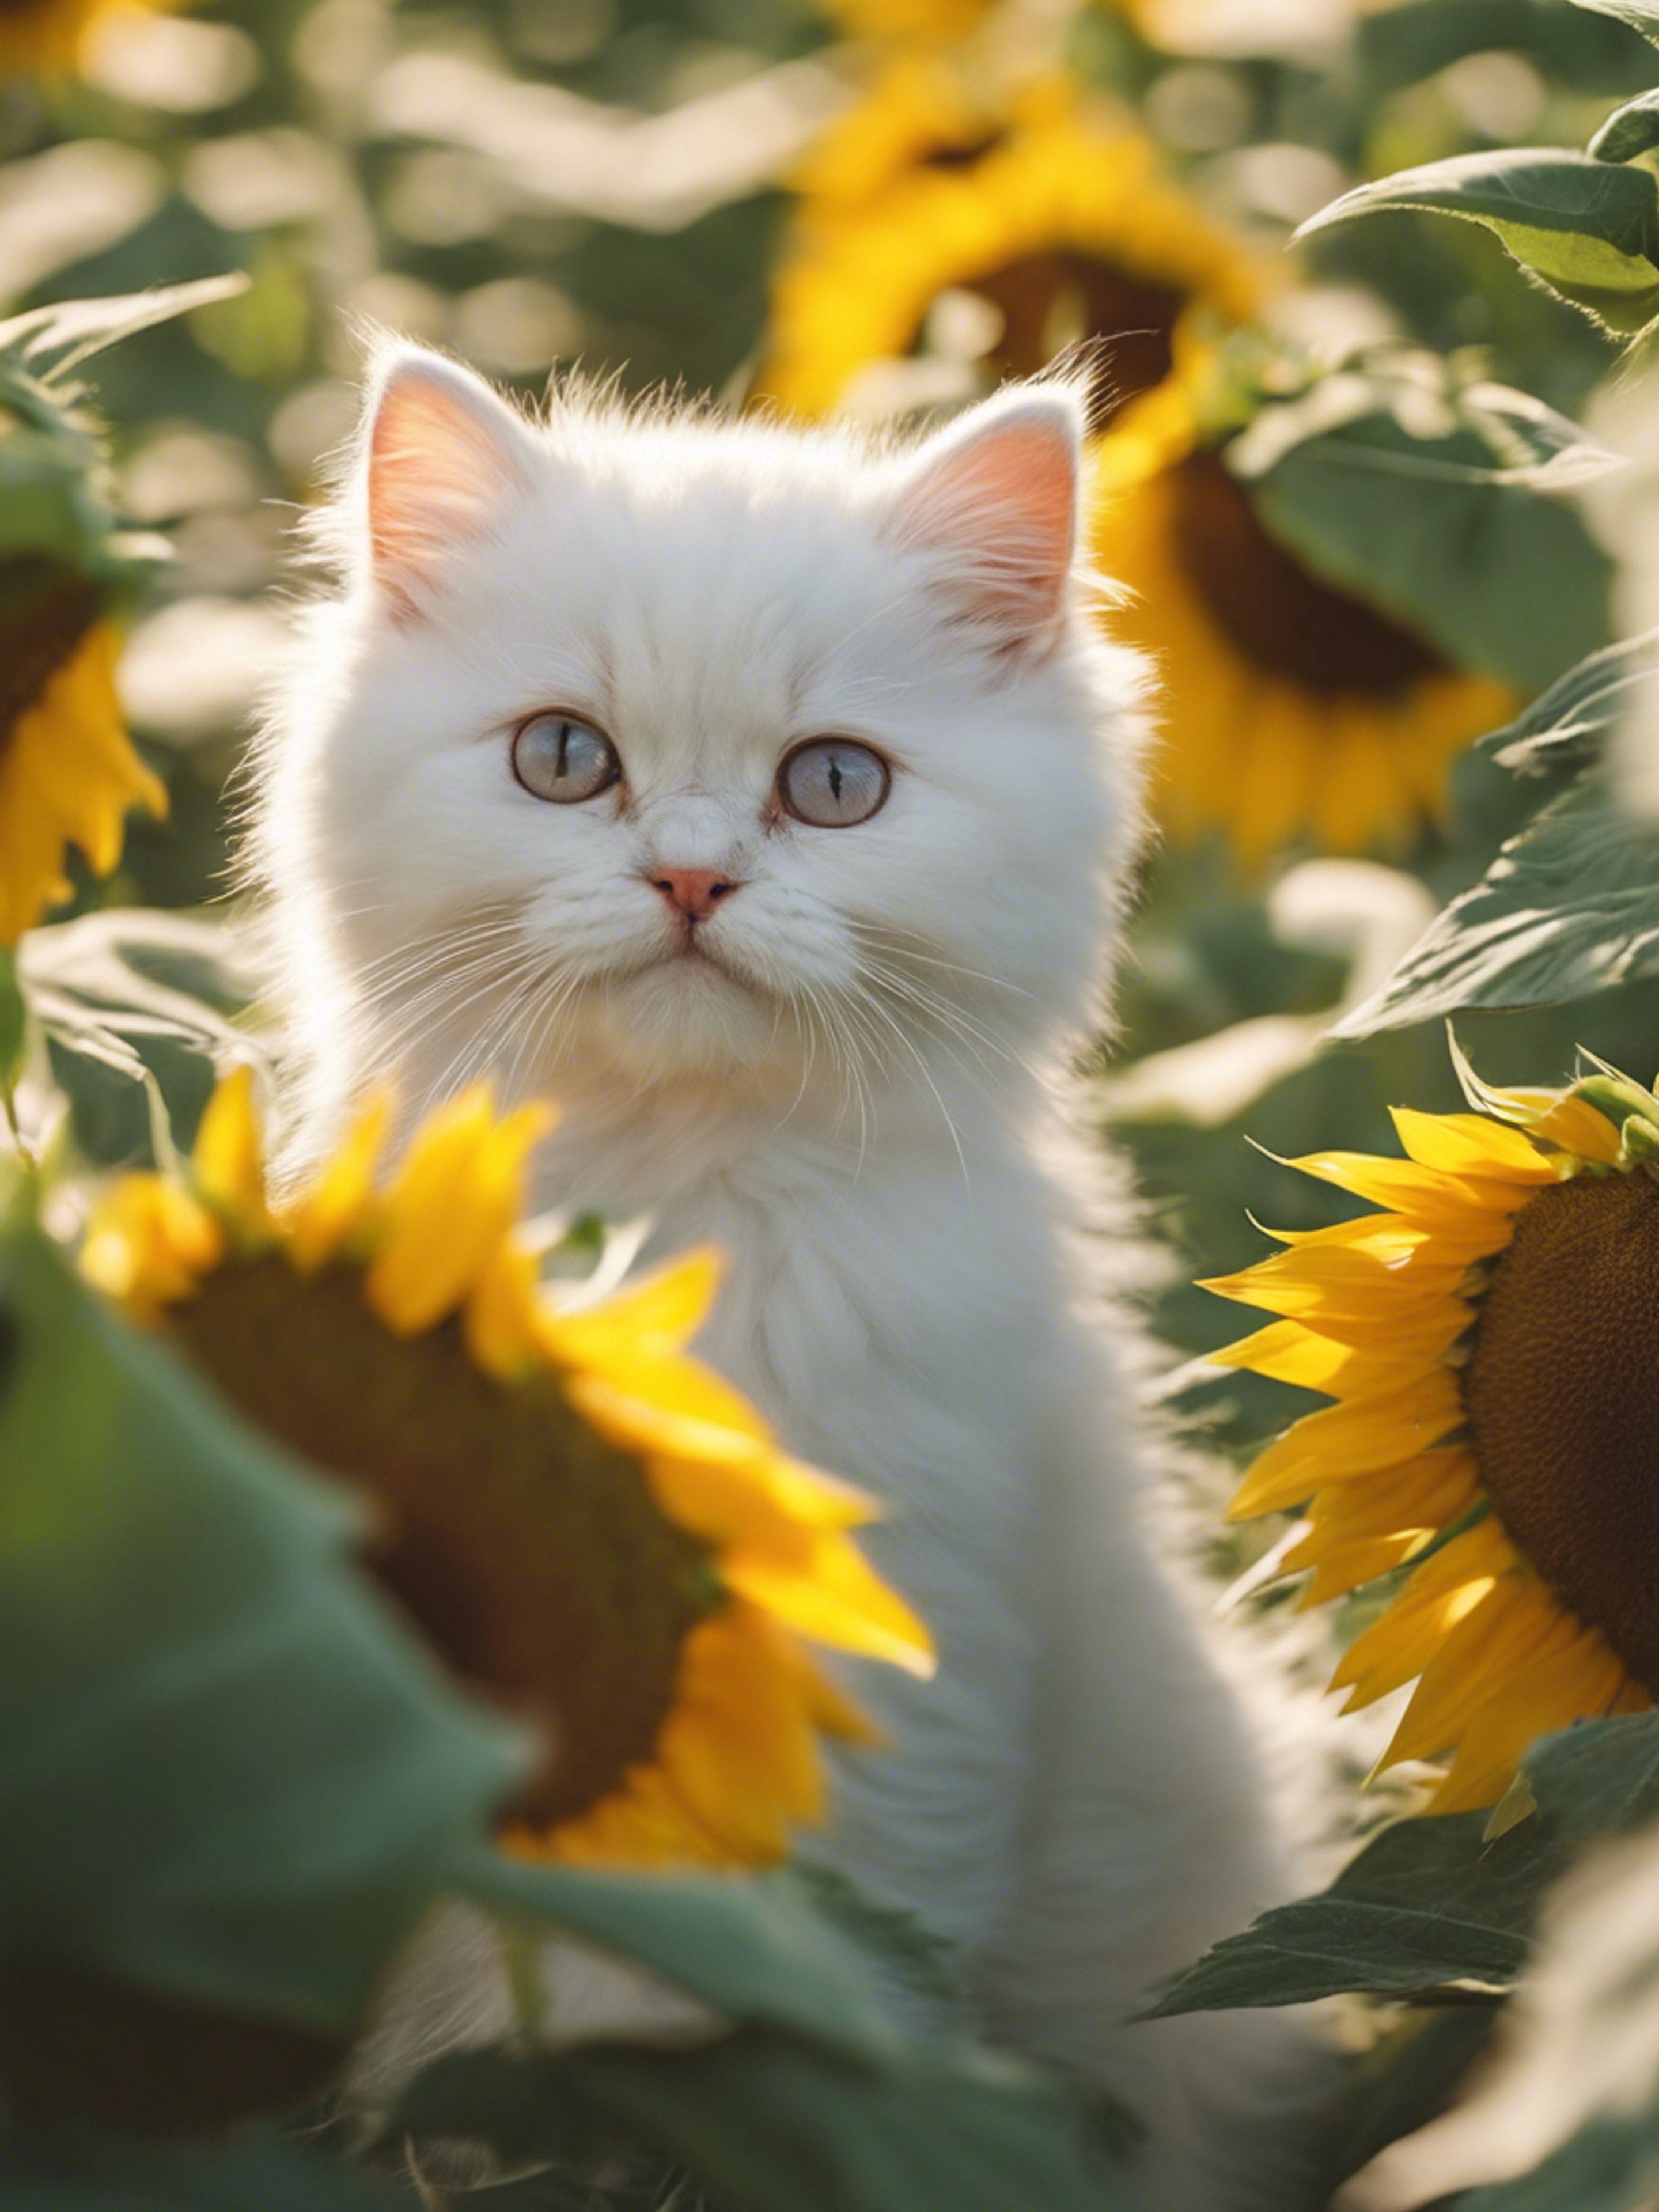 A snow-white Persian kitten playing peek-a-boo among a field of sunflowers on a bright, sunny day.壁紙[783f0584fefb42ff9955]